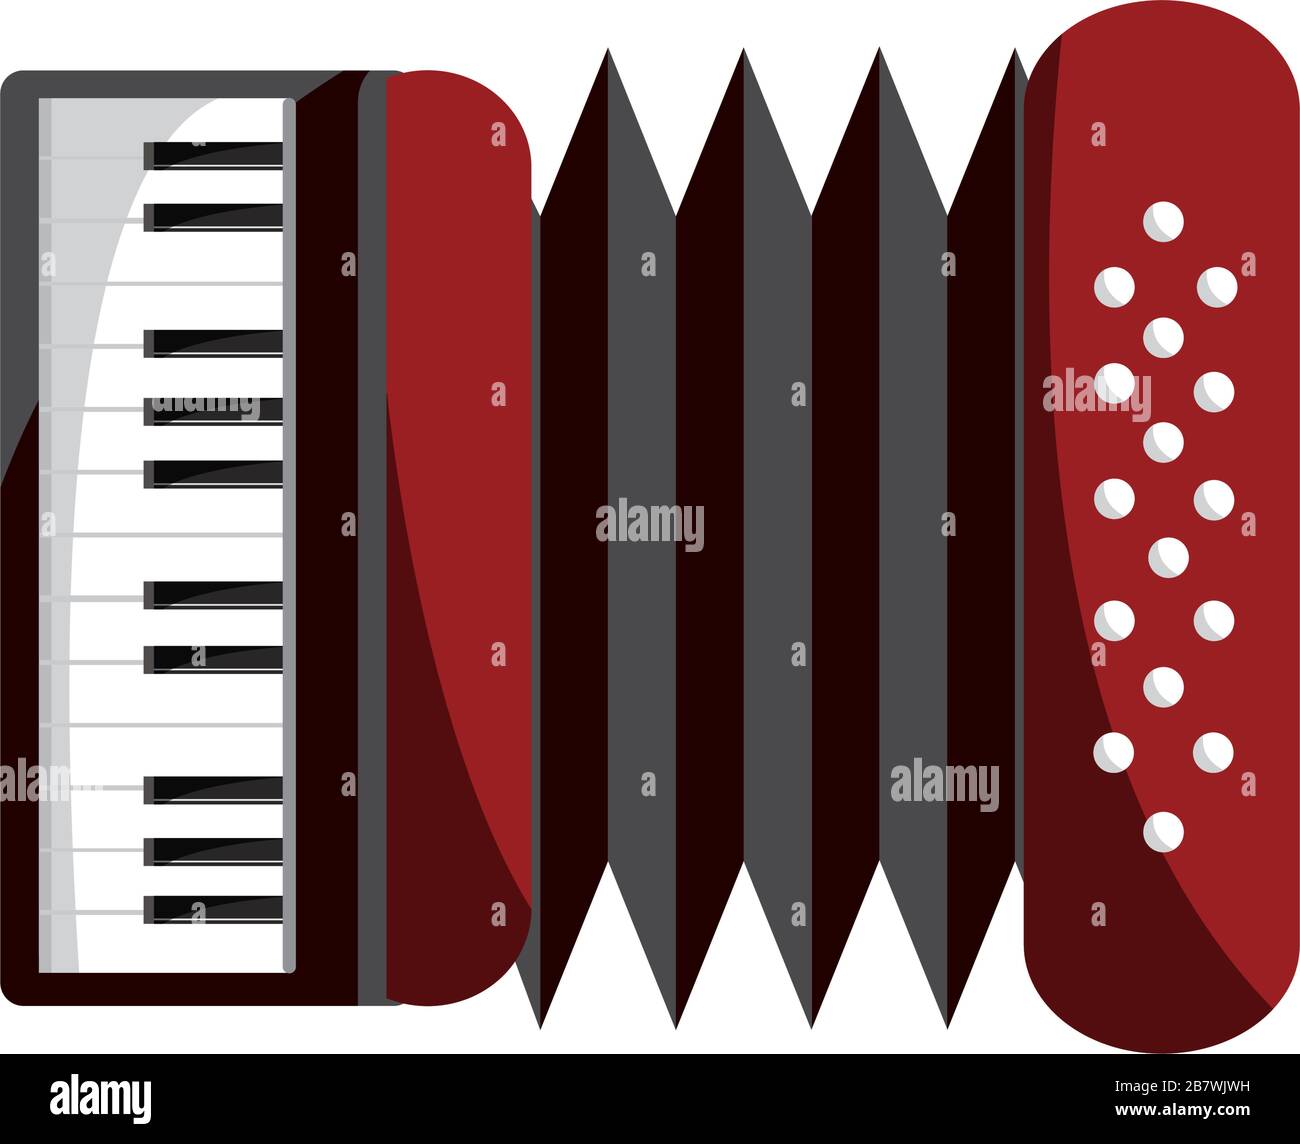 accordion musical instrument vector illustration isolated icon Stock ...